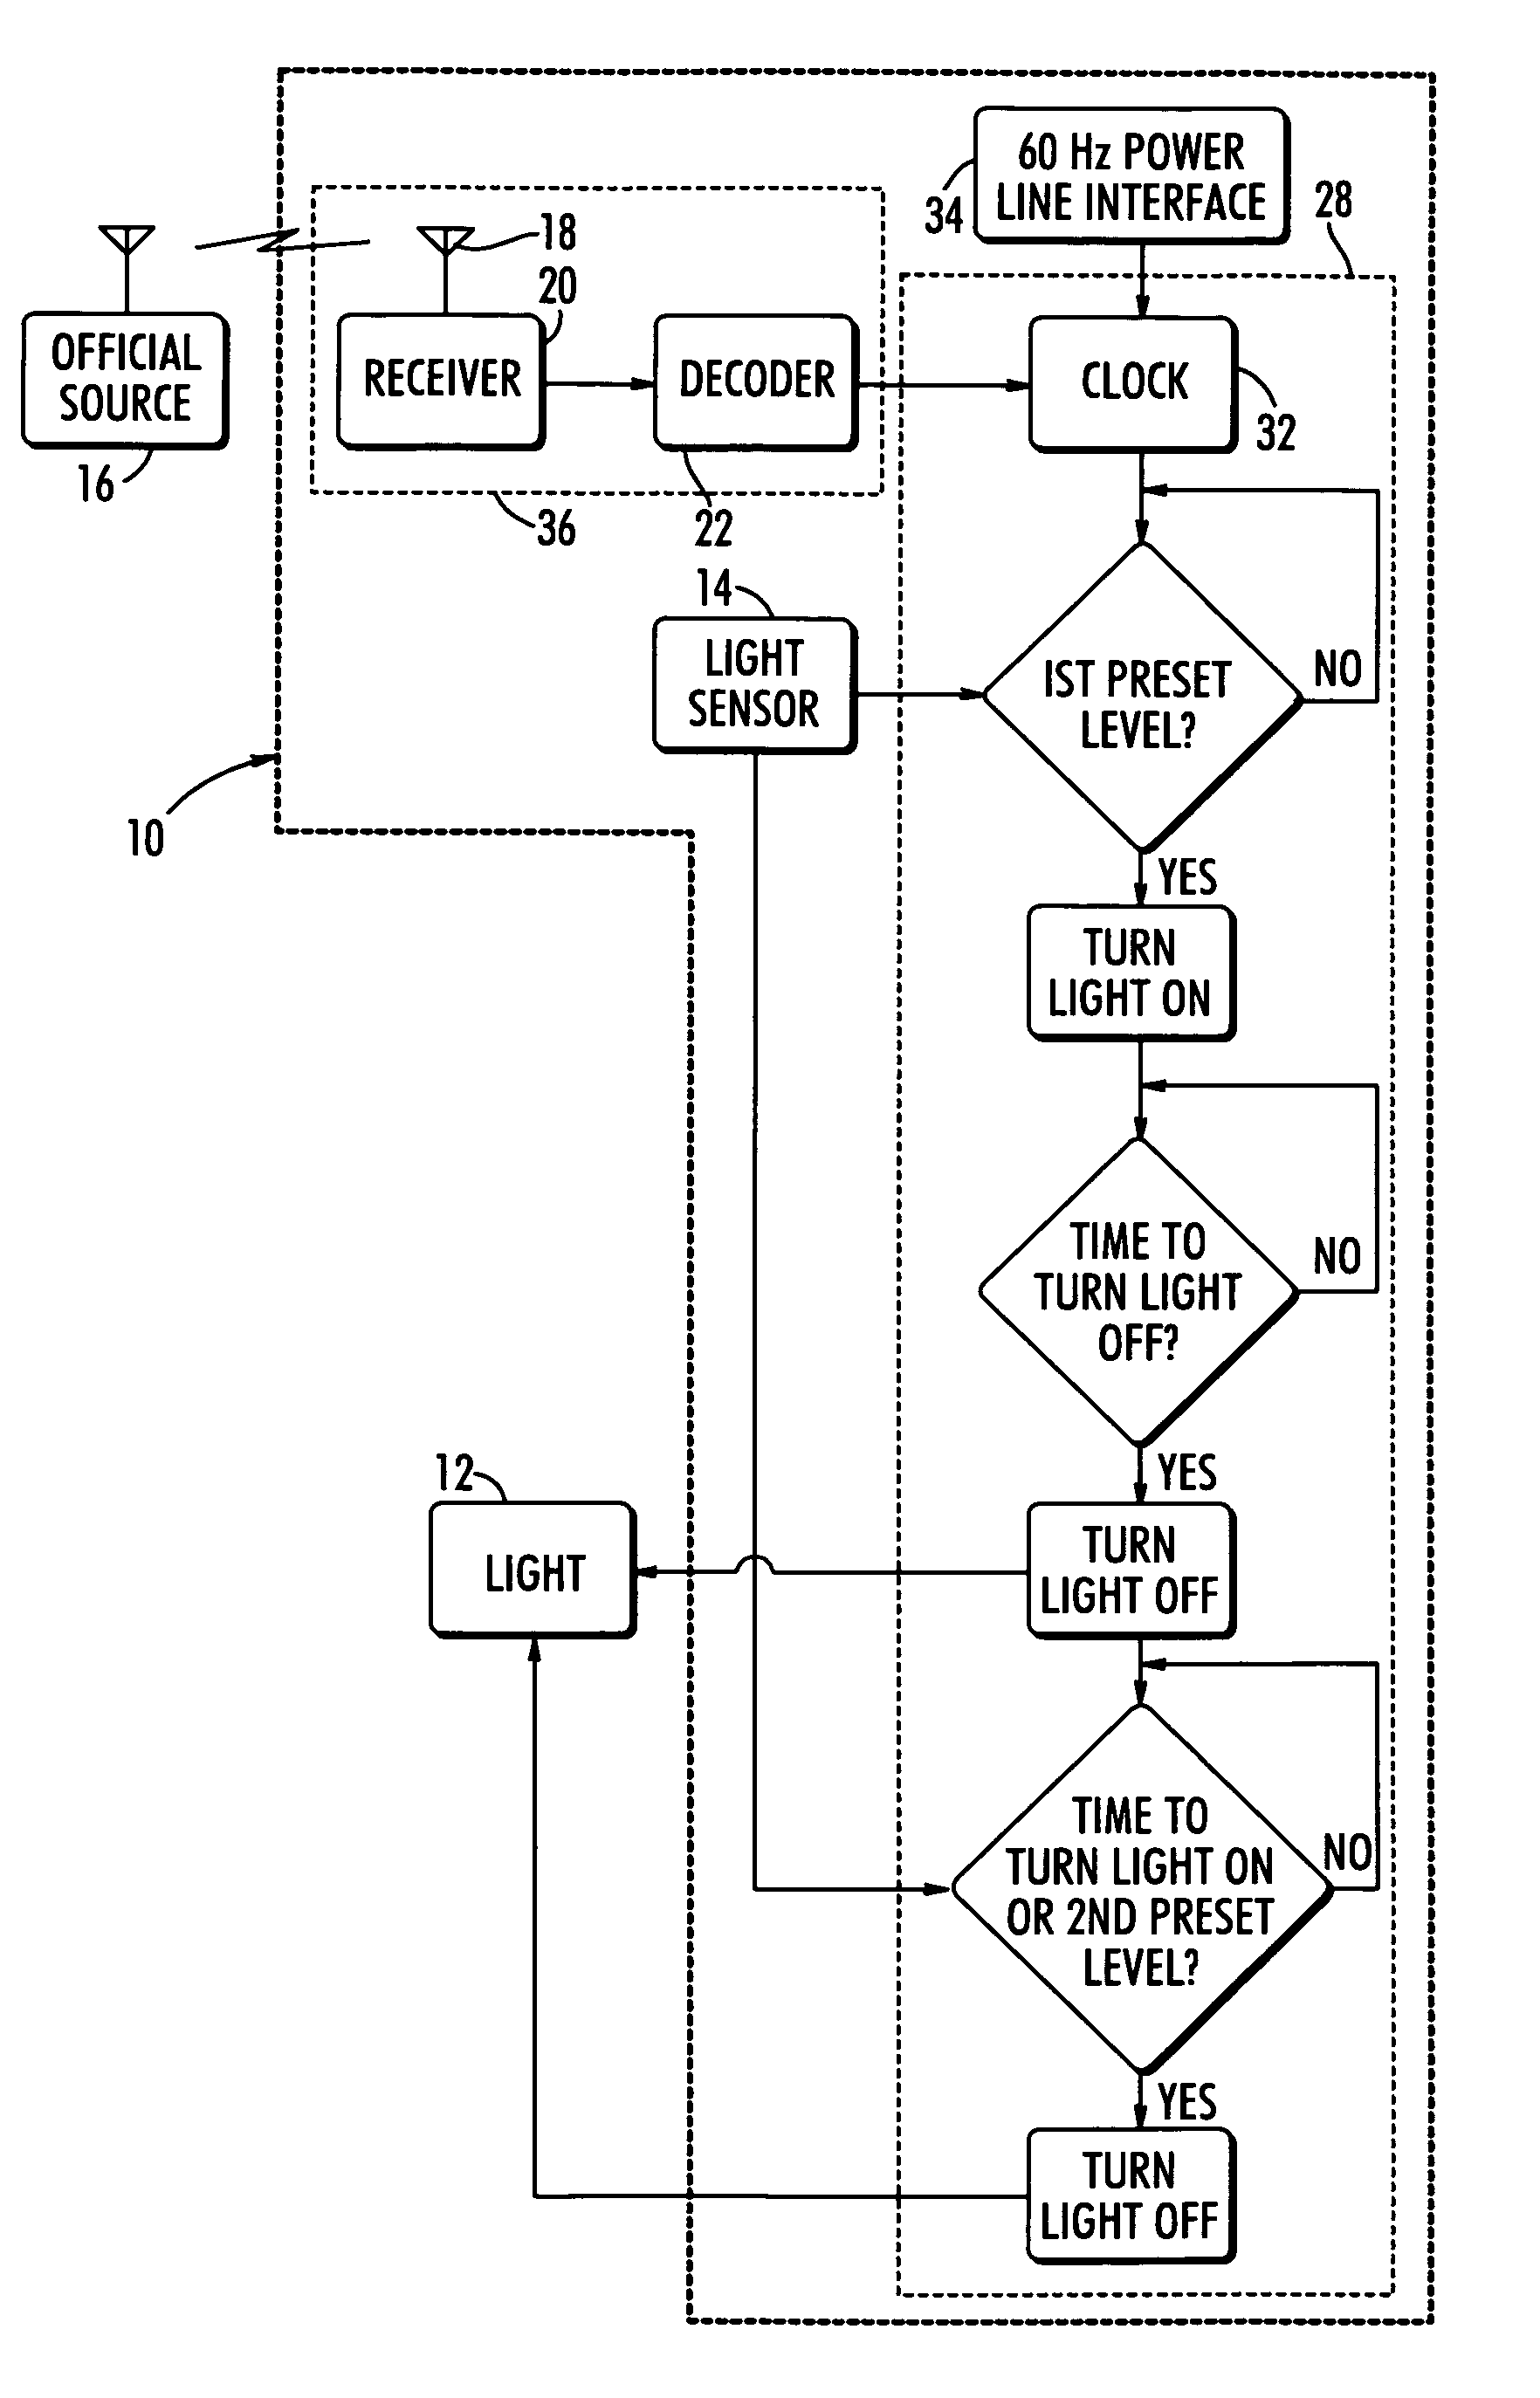 Photocontrol with radio-controlled timer and a decoder